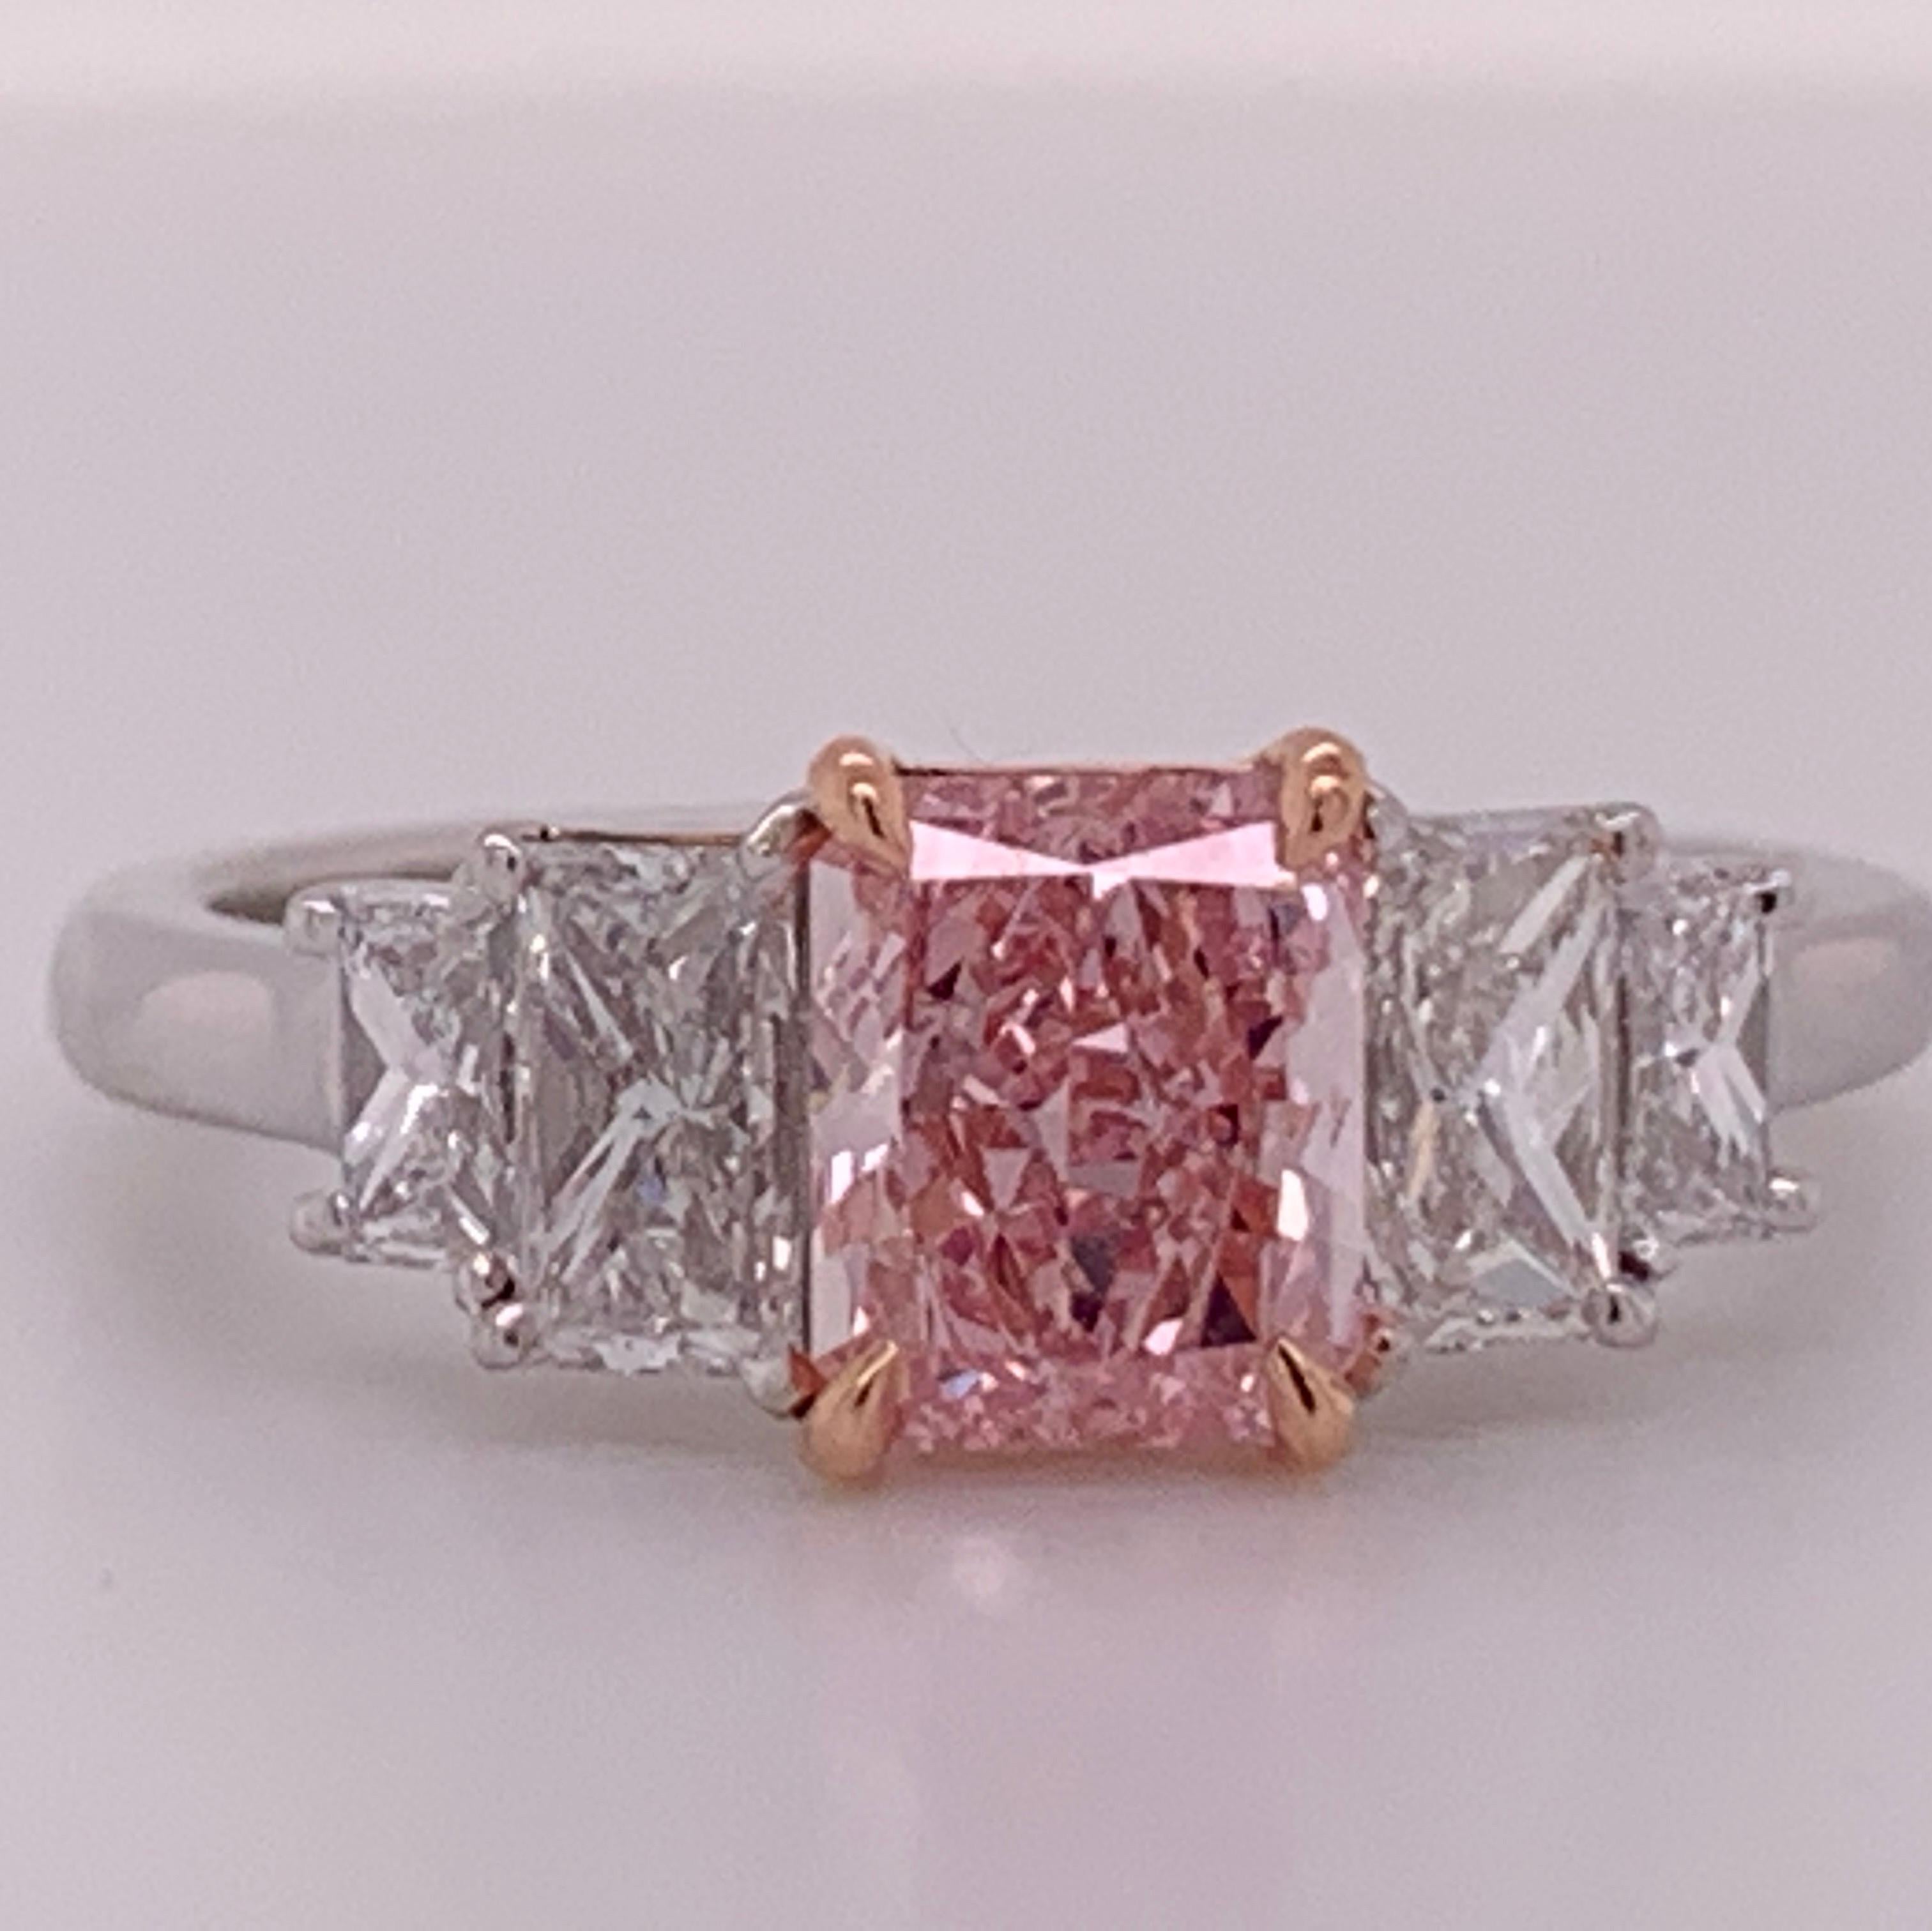 A rare Platinum Ring Radiant Cut 0.88 carat Fancy Intense Pink GIA vs2, no fluorescence. 

Set with four rectangular diamonds weighing 0.81 carats, approximately F in color and VS1 in clarity.